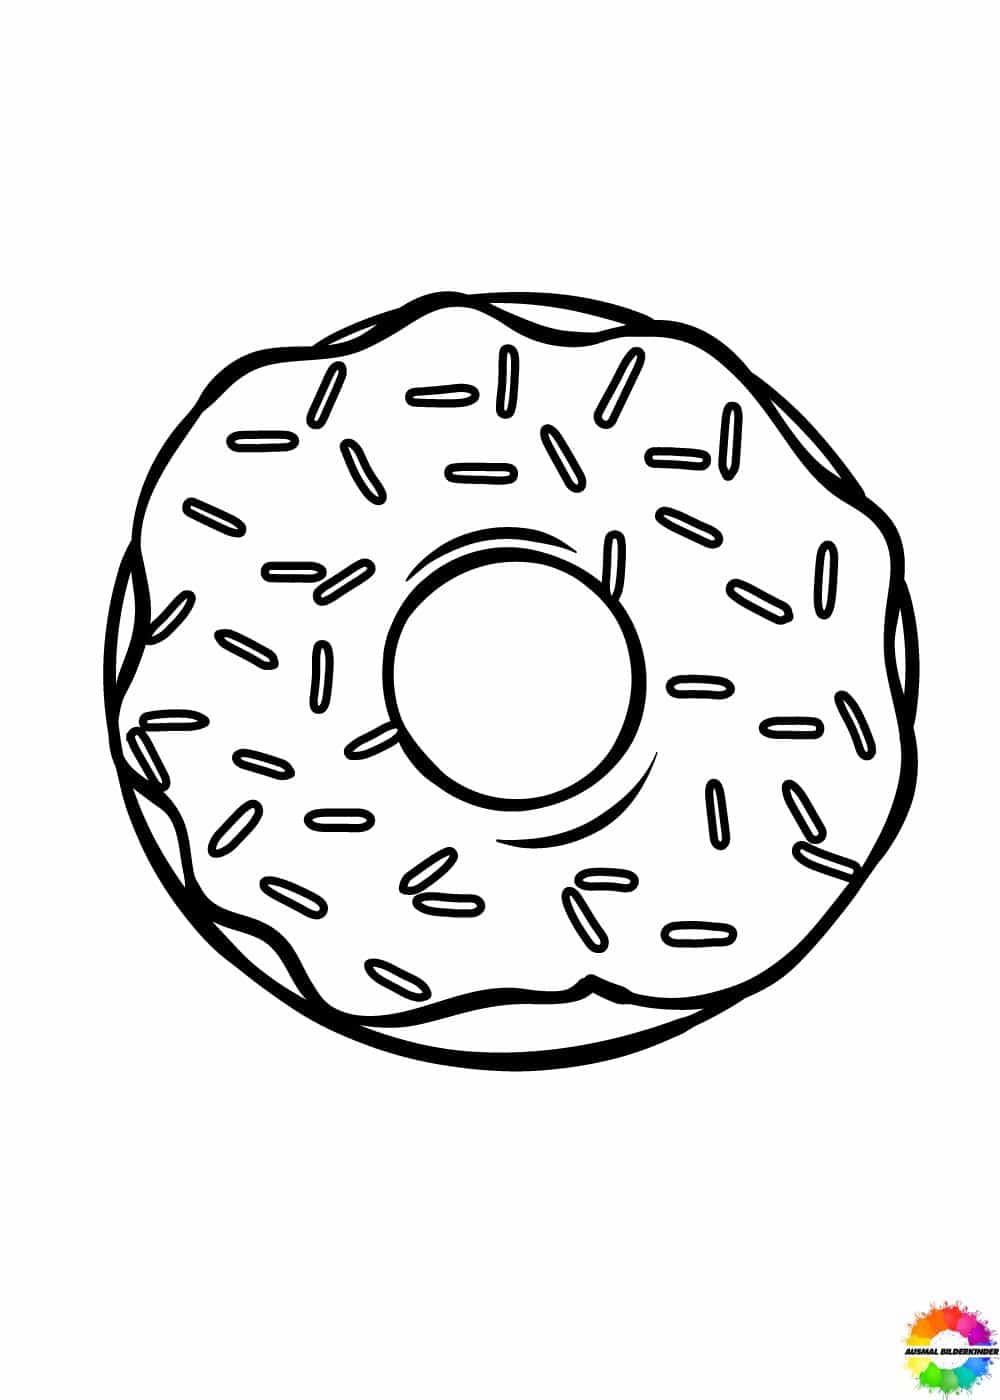 Donuts 22